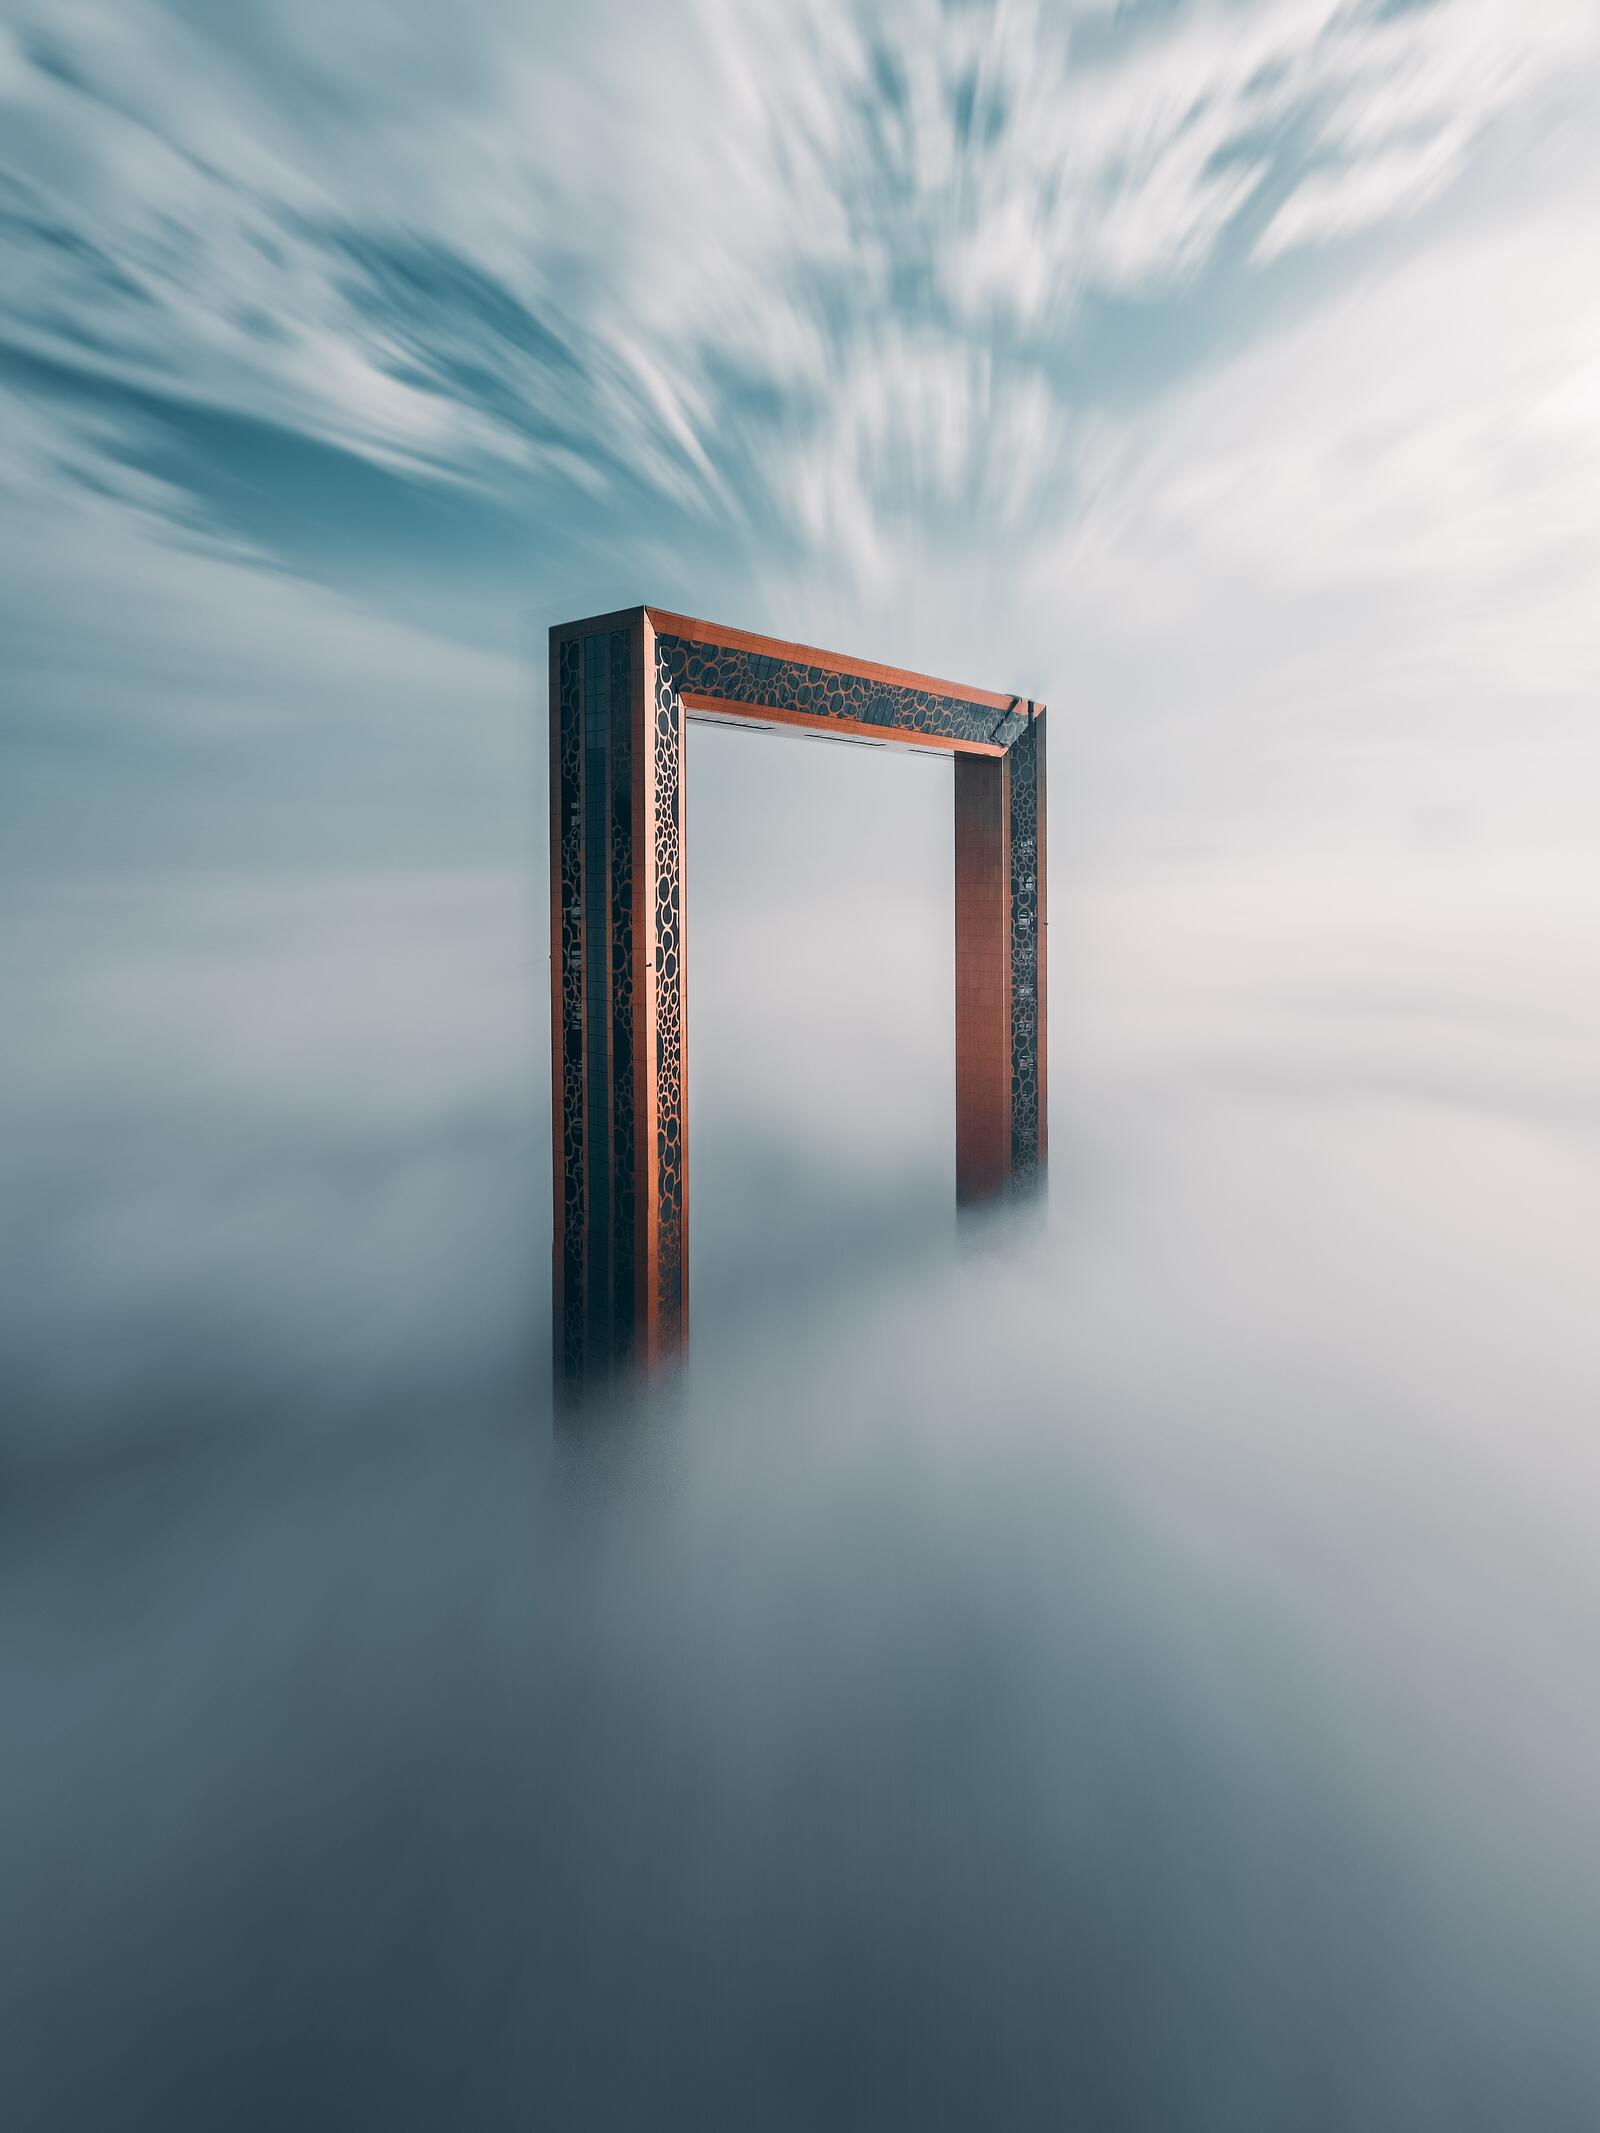 Wallpapers wallpaper gate portal behind the clouds on the desktop